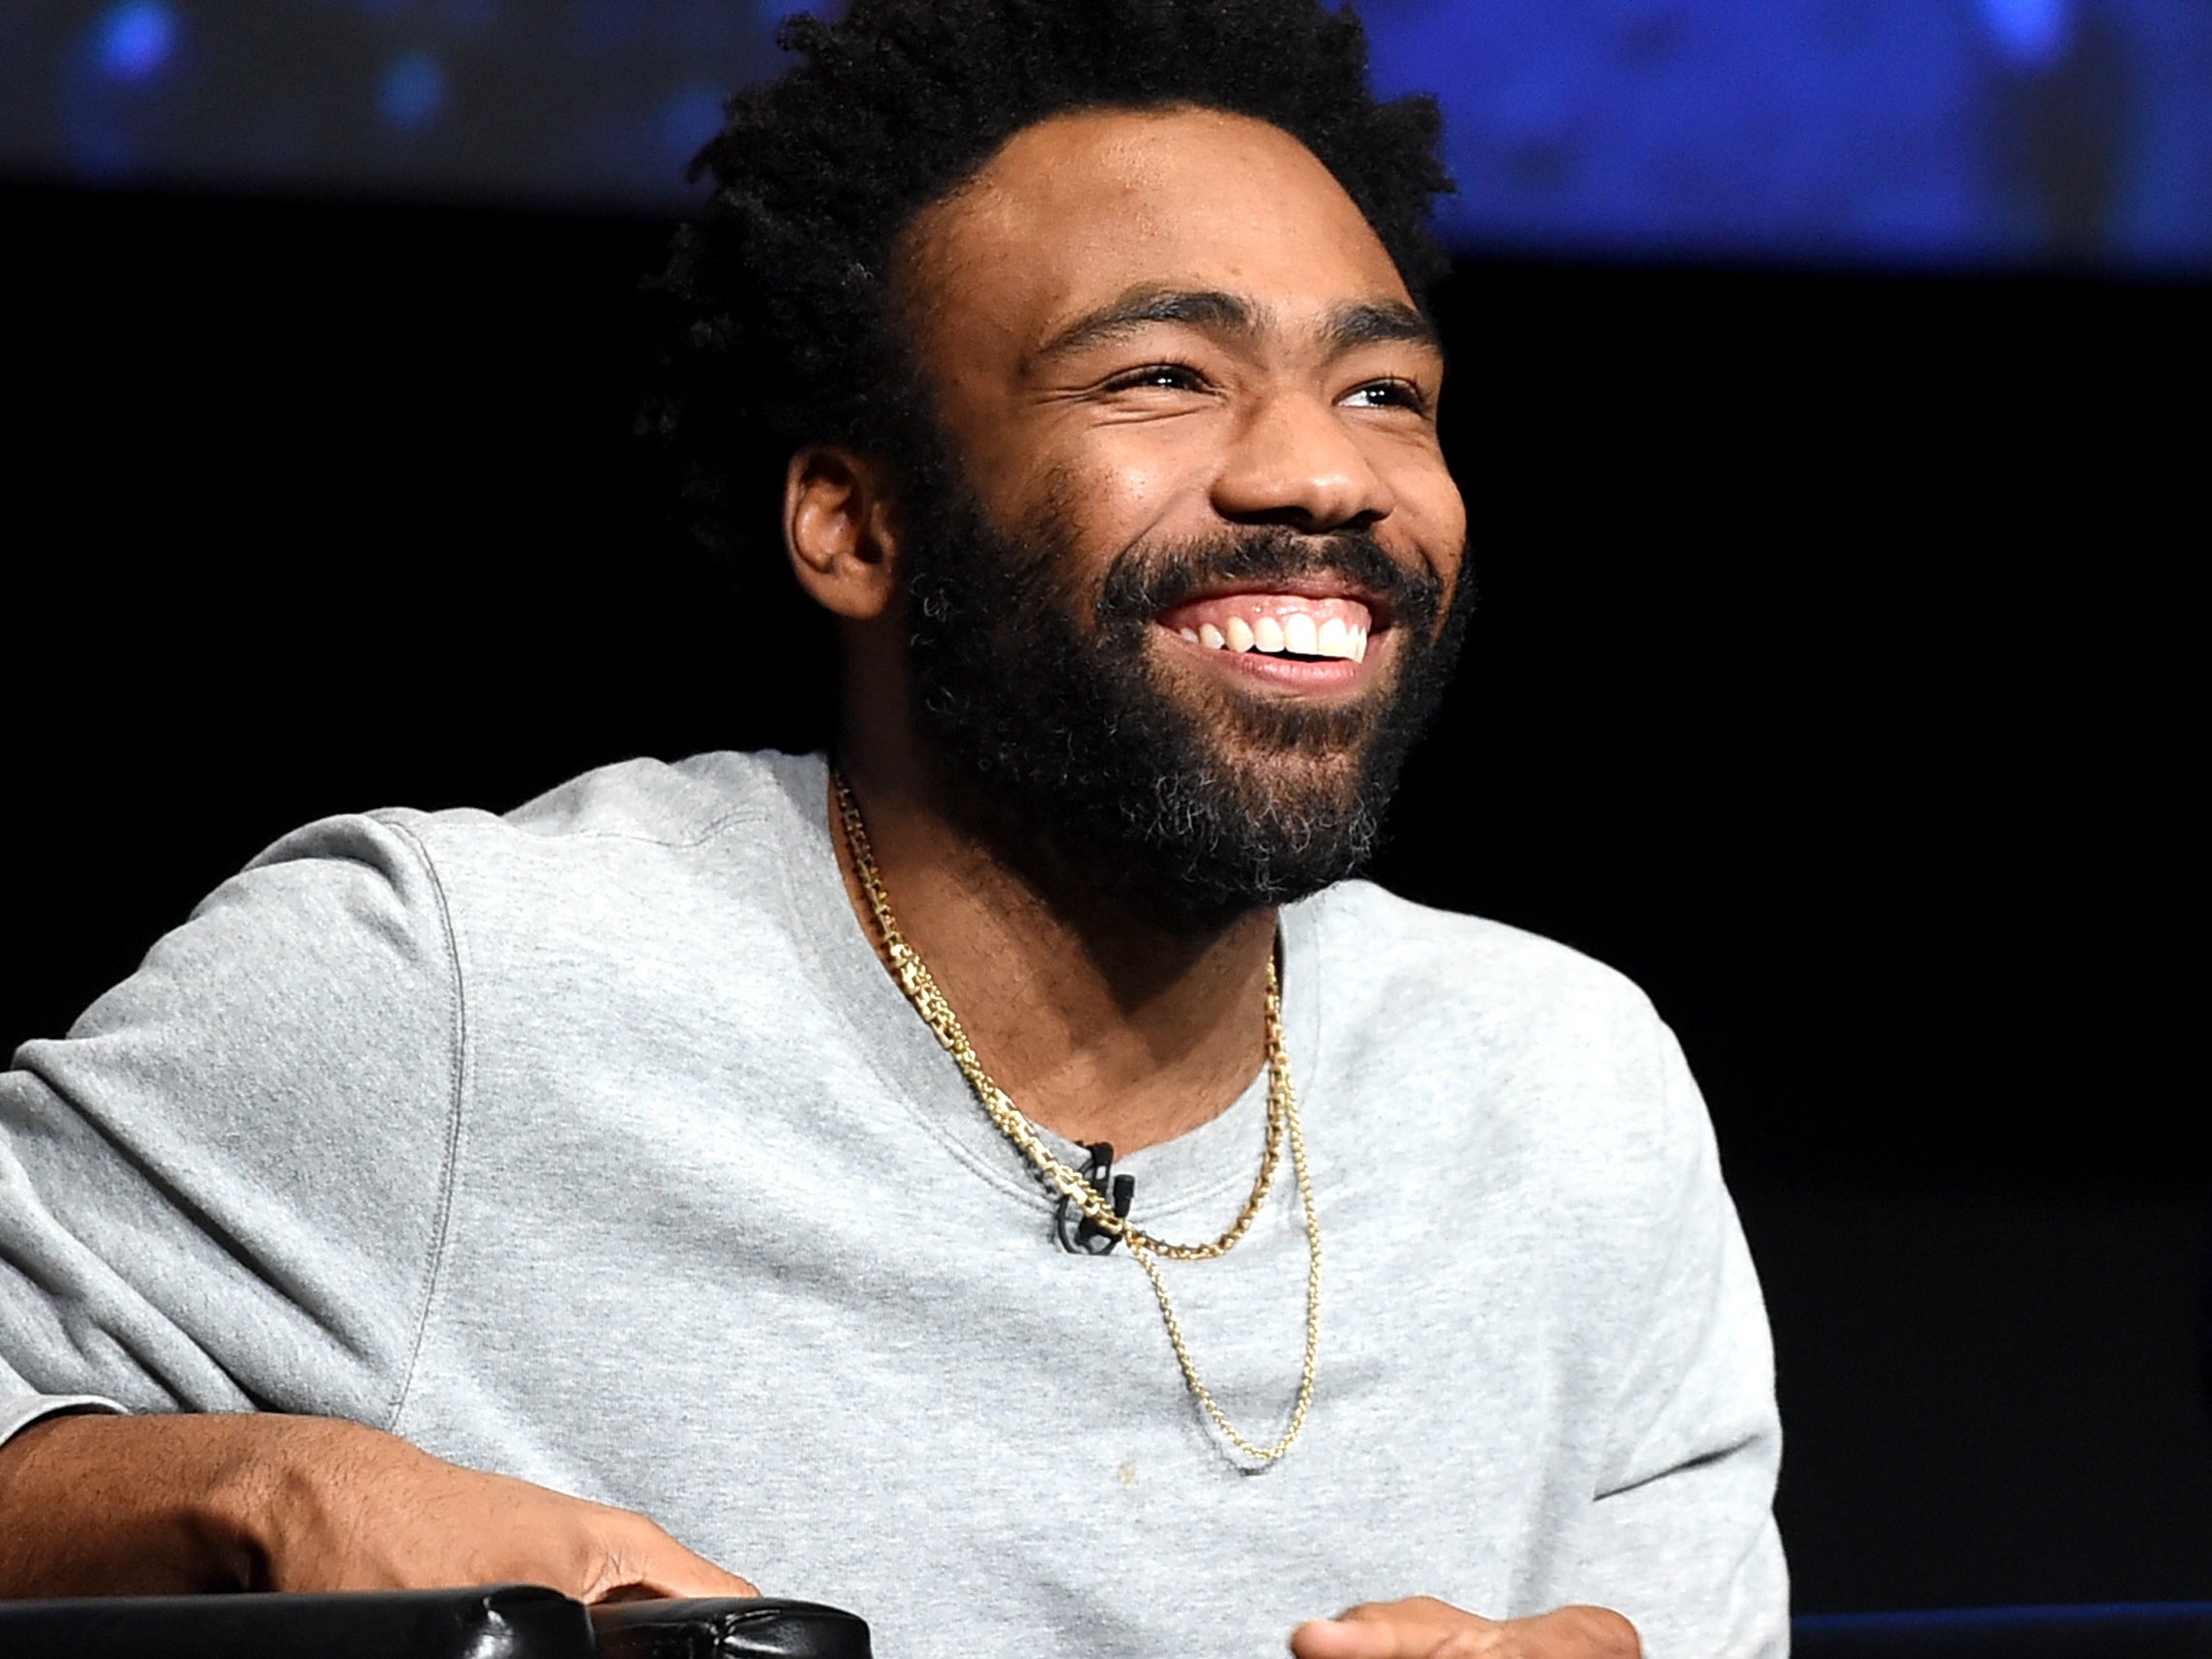 Donald Glover Gives The People What They Want: New Music